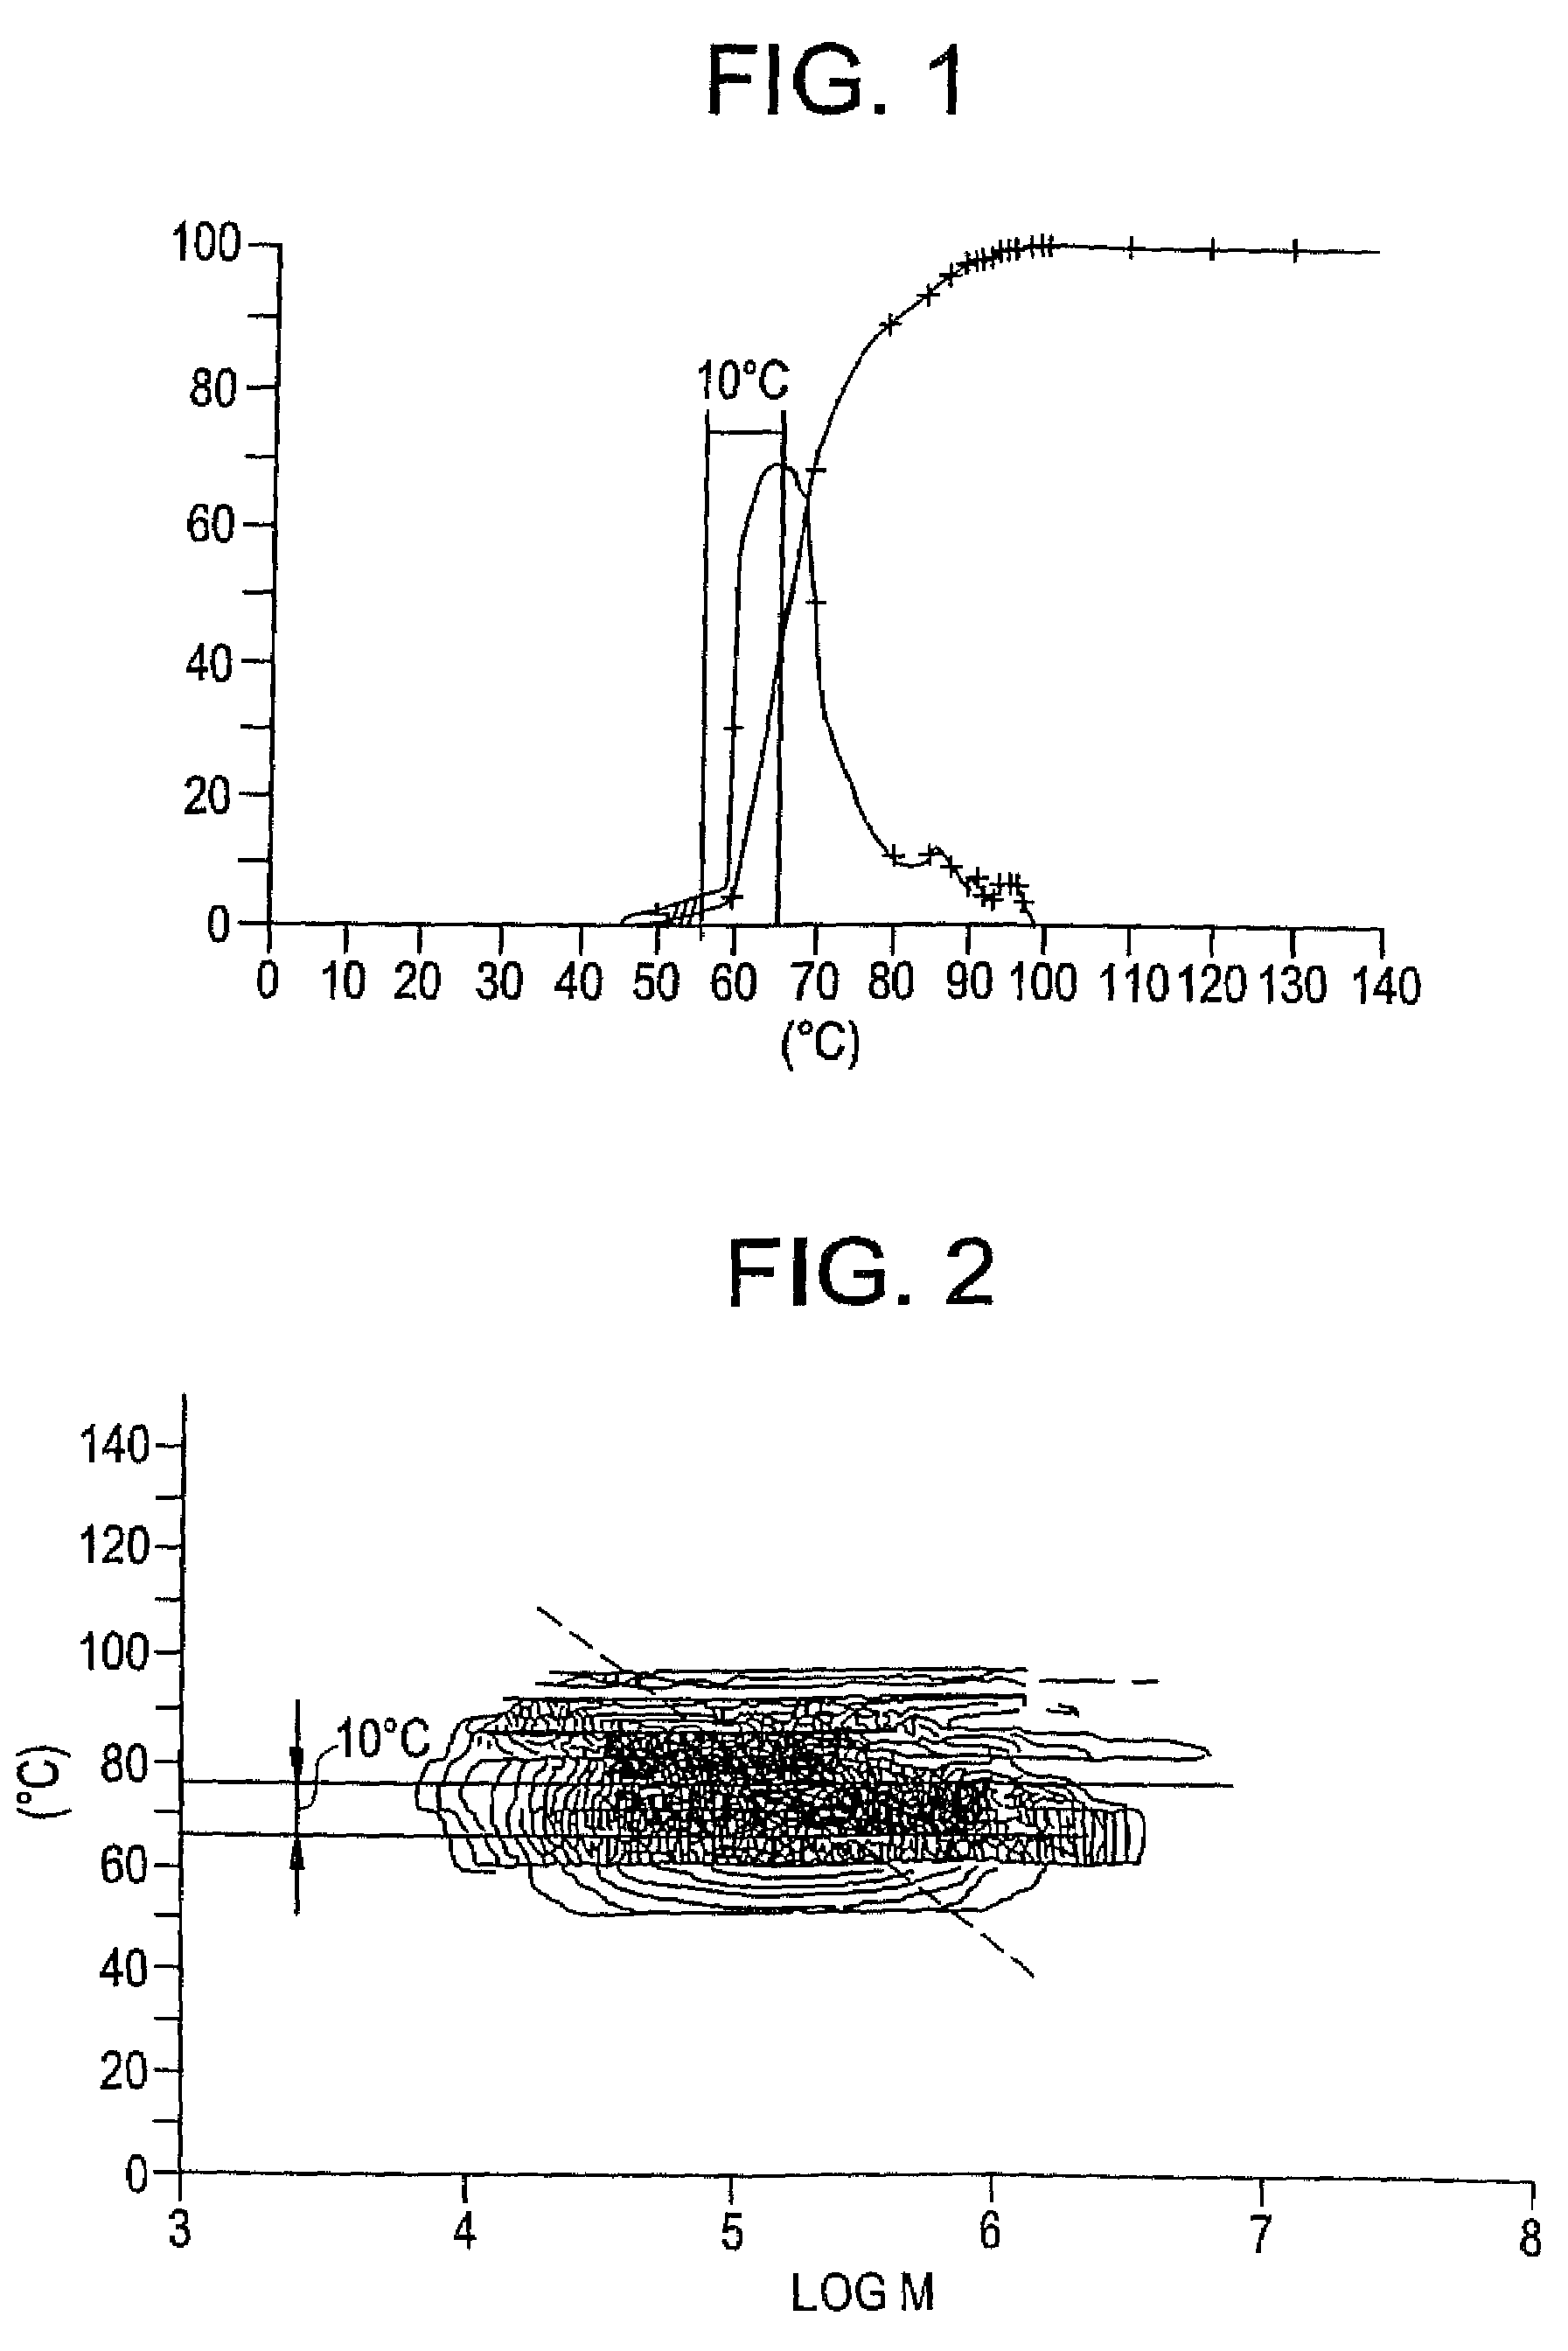 Ethylene copolymers and blend compositions